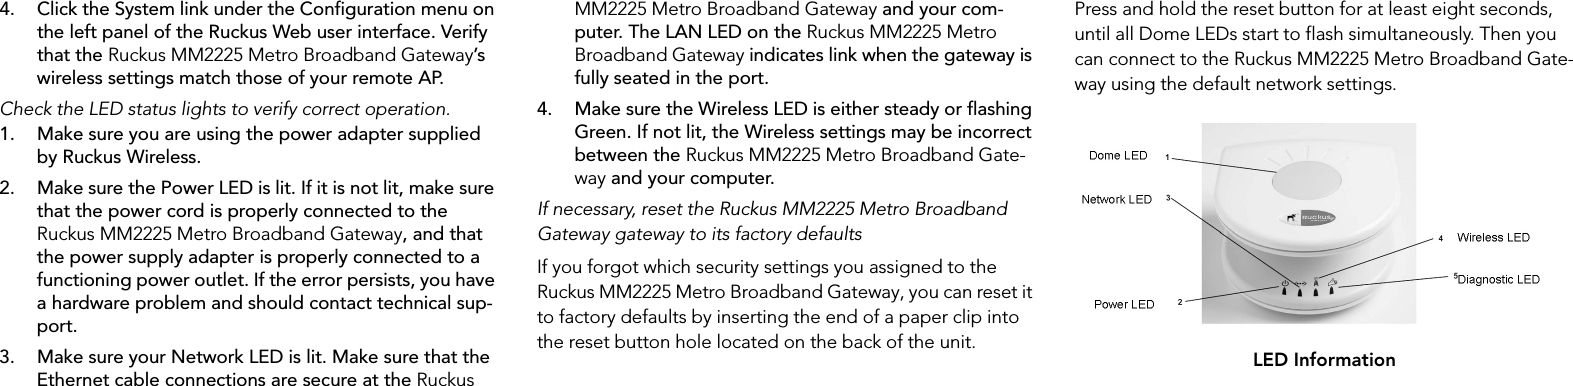 4. Click the System link under the Configuration menu on the left panel of the Ruckus Web user interface. Verify that the Ruckus MM2225 Metro Broadband Gateway’s wireless settings match those of your remote AP.Check the LED status lights to verify correct operation.1. Make sure you are using the power adapter supplied by Ruckus Wireless.2. Make sure the Power LED is lit. If it is not lit, make sure that the power cord is properly connected to the Ruckus MM2225 Metro Broadband Gateway, and that the power supply adapter is properly connected to a functioning power outlet. If the error persists, you have a hardware problem and should contact technical sup-port.3. Make sure your Network LED is lit. Make sure that the Ethernet cable connections are secure at the Ruckus MM2225 Metro Broadband Gateway and your com-puter. The LAN LED on the Ruckus MM2225 Metro Broadband Gateway indicates link when the gateway is fully seated in the port.4. Make sure the Wireless LED is either steady or flashing Green. If not lit, the Wireless settings may be incorrect between the Ruckus MM2225 Metro Broadband Gate-way and your computer.If necessary, reset the Ruckus MM2225 Metro Broadband Gateway gateway to its factory defaultsIf you forgot which security settings you assigned to the Ruckus MM2225 Metro Broadband Gateway, you can reset it to factory defaults by inserting the end of a paper clip into the reset button hole located on the back of the unit.Press and hold the reset button for at least eight seconds, until all Dome LEDs start to flash simultaneously. Then you can connect to the Ruckus MM2225 Metro Broadband Gate-way using the default network settings.LED Information